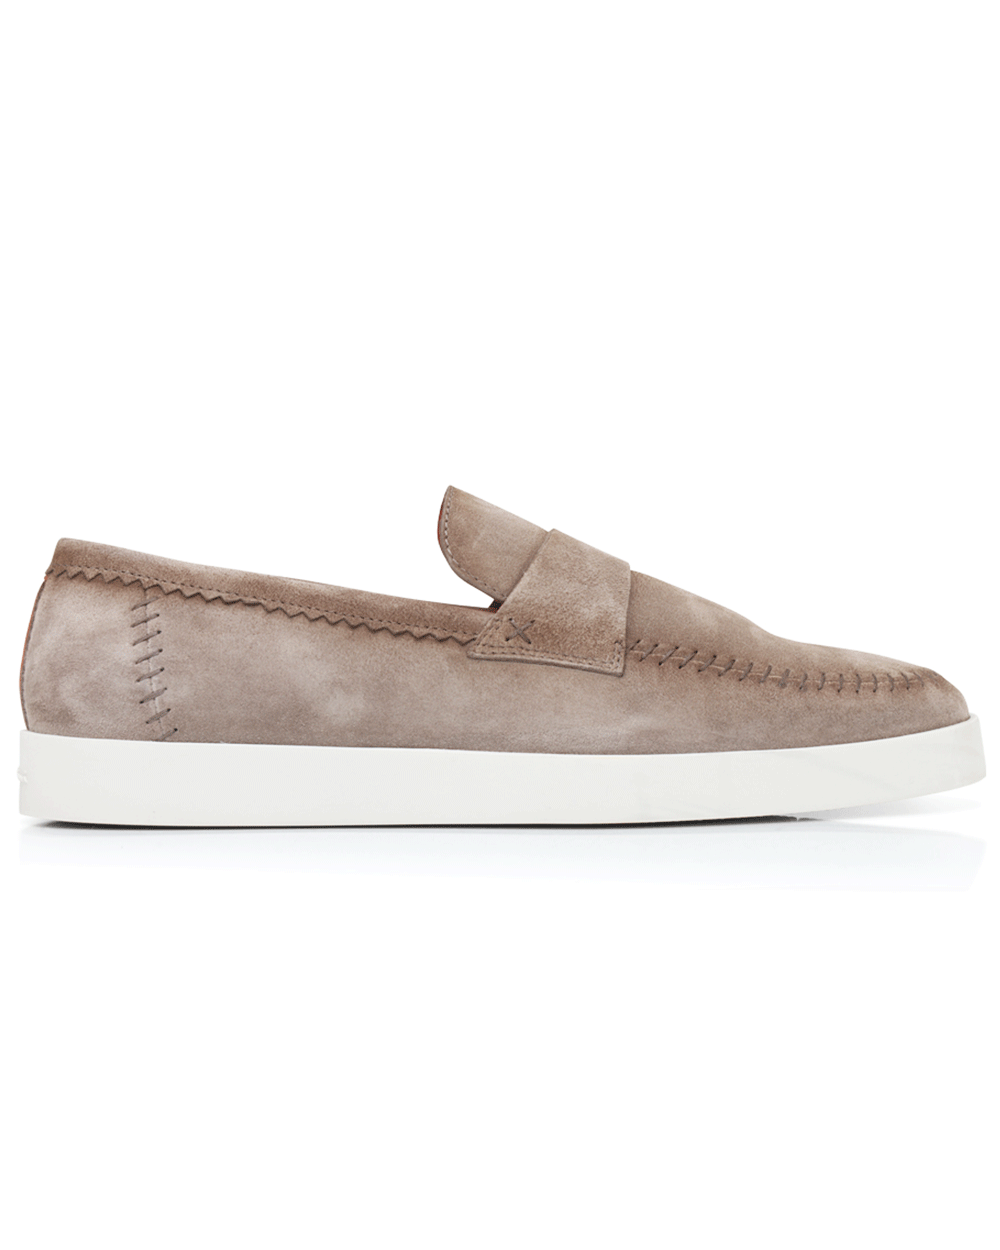 Suede Stitched Dowdy Loafer in Taupe